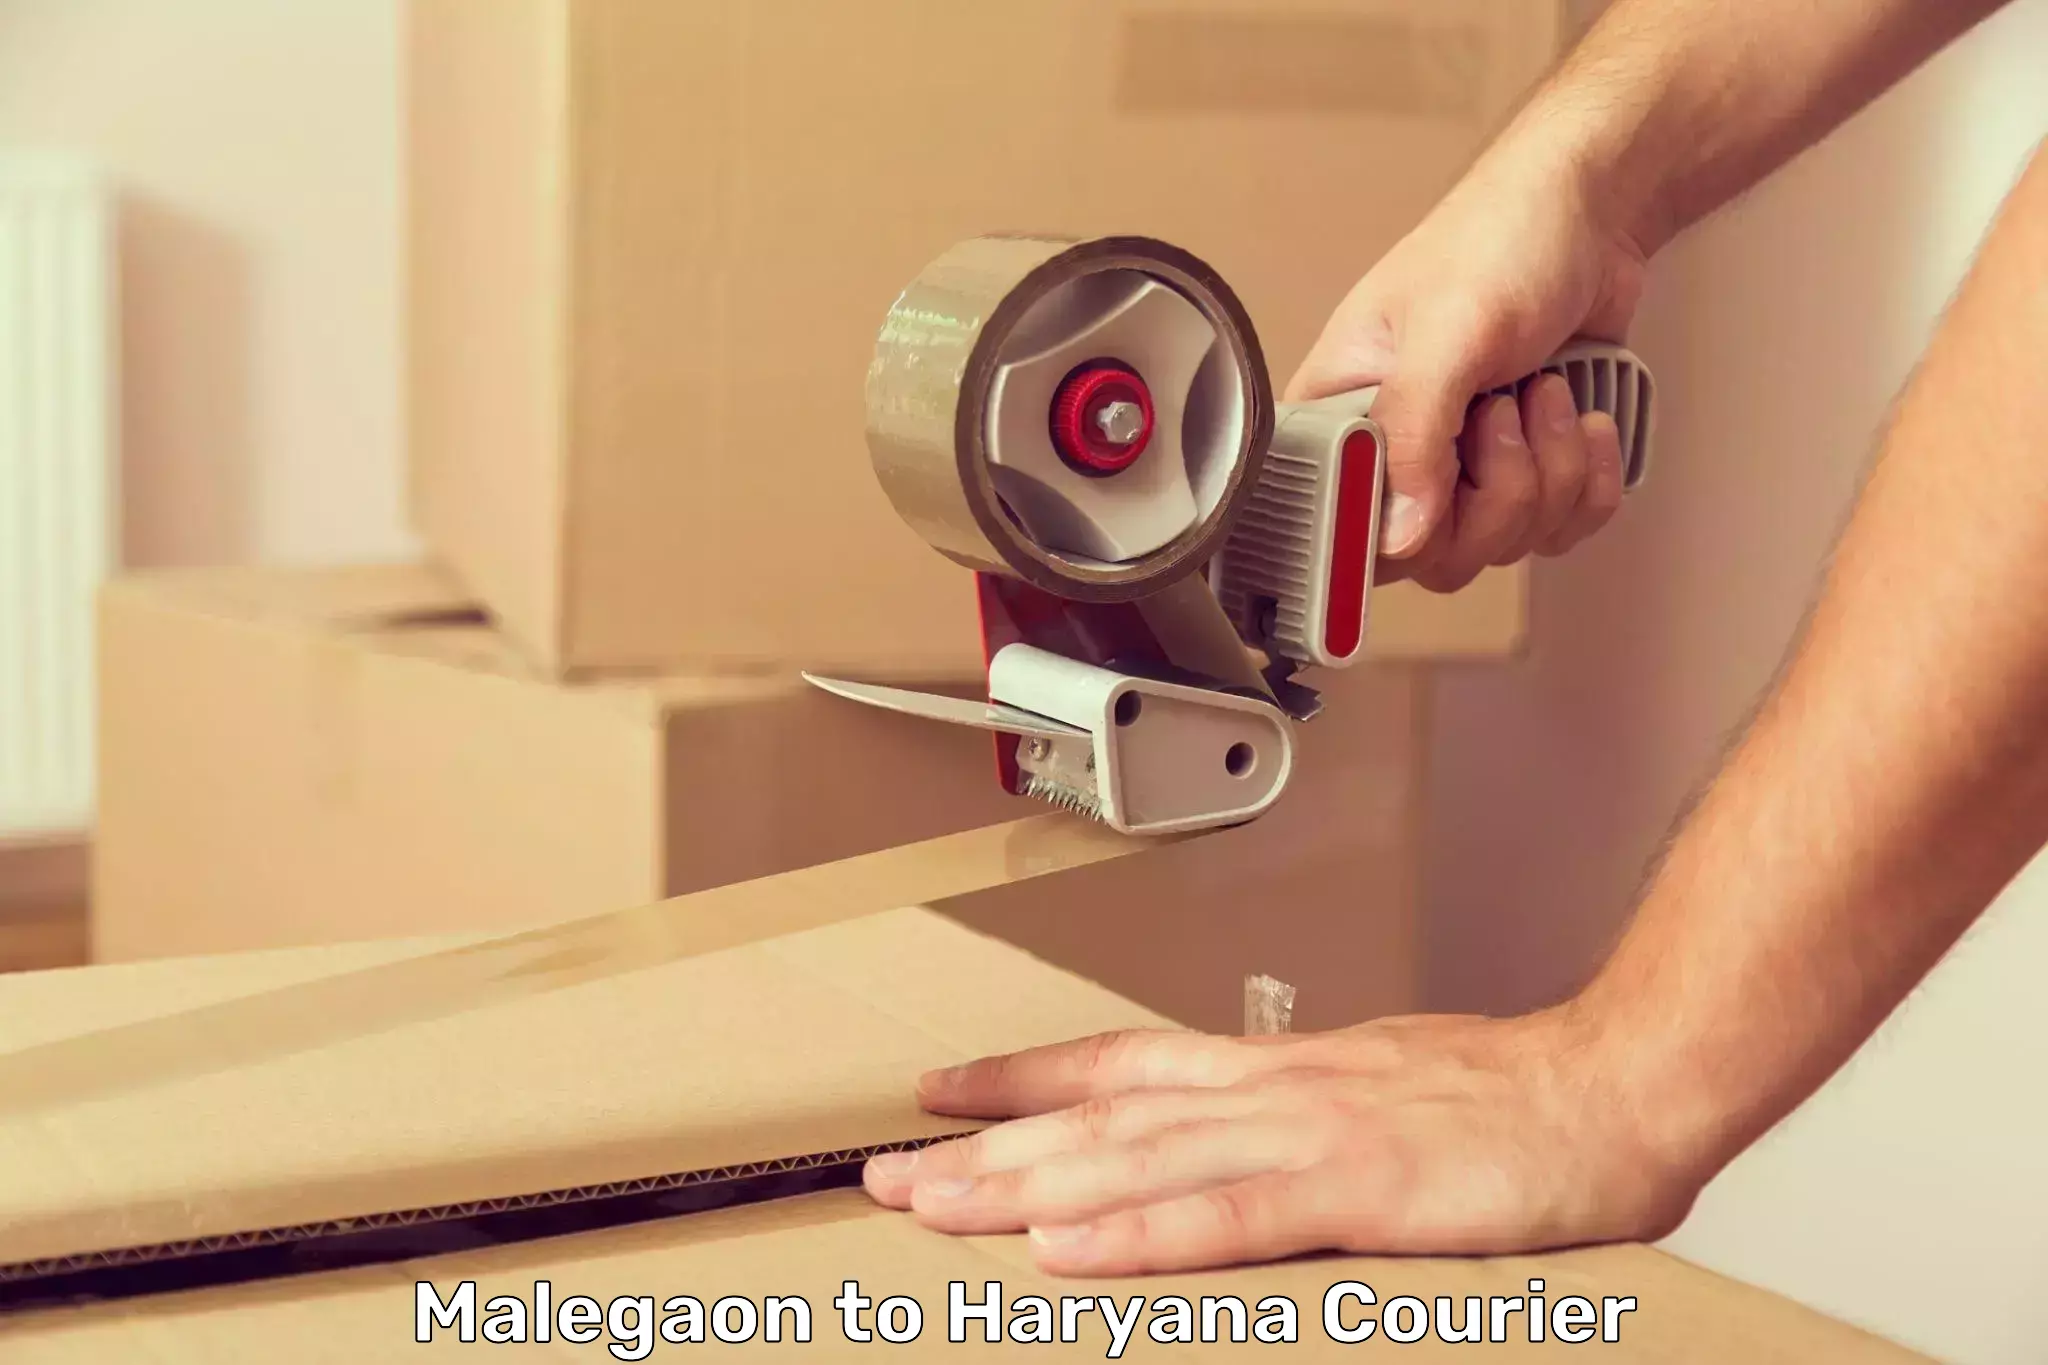 Multi-service courier options Malegaon to NCR Haryana